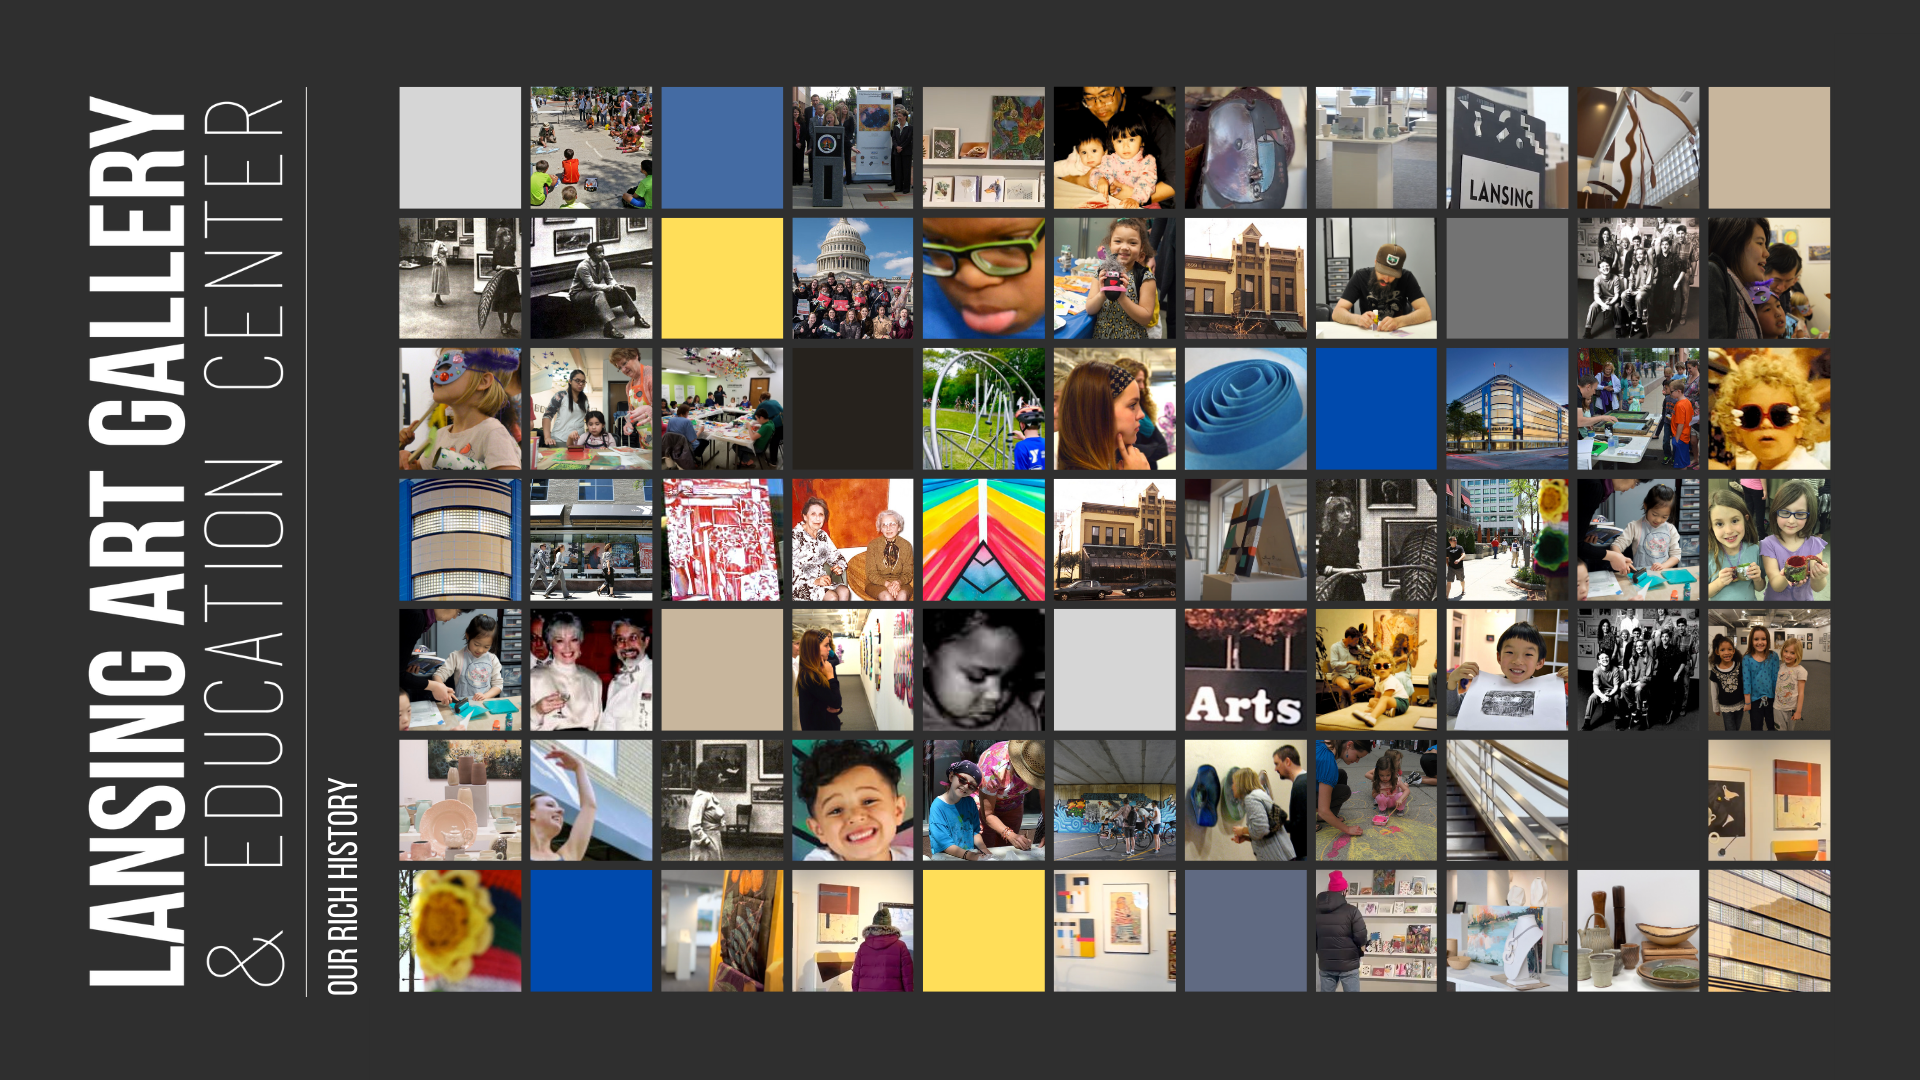 Image grid of various artwork, photos, and colors to represent the Lansing Art Gallery's rich history.